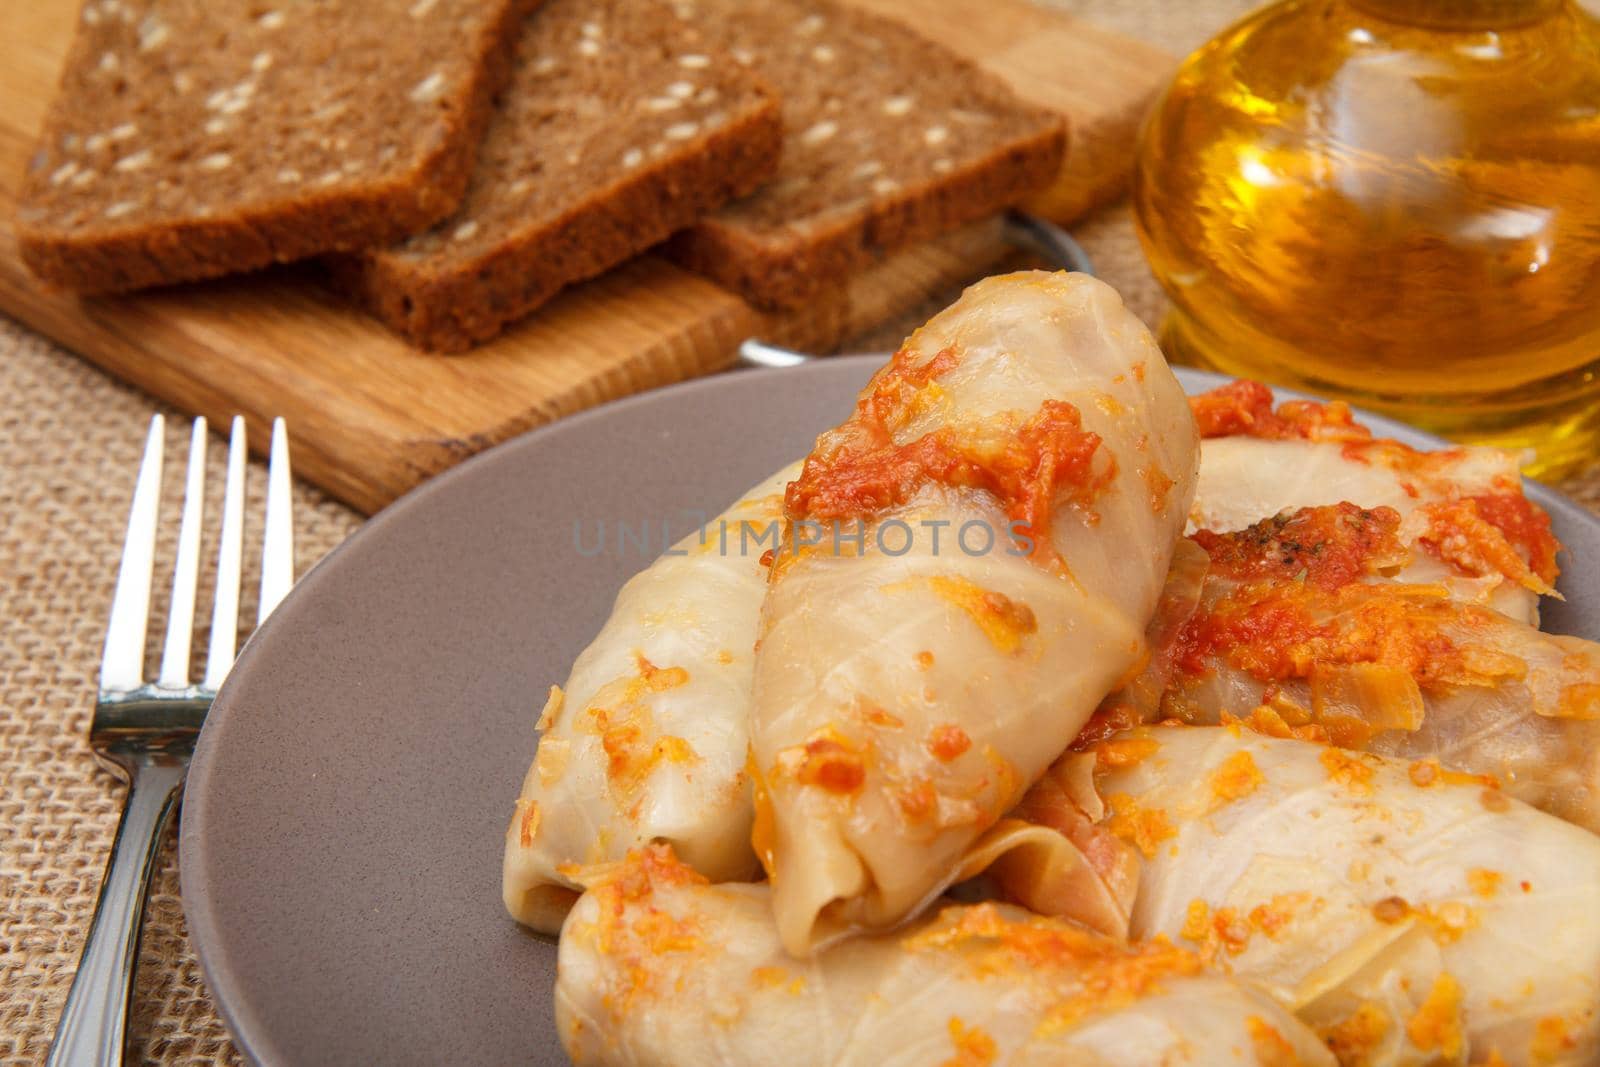 Delicious homemade cabbage rolls stuffed with rice and meat in plate, fork, bottle with sunflower oil and bread on wooden cutting board on sackcloth